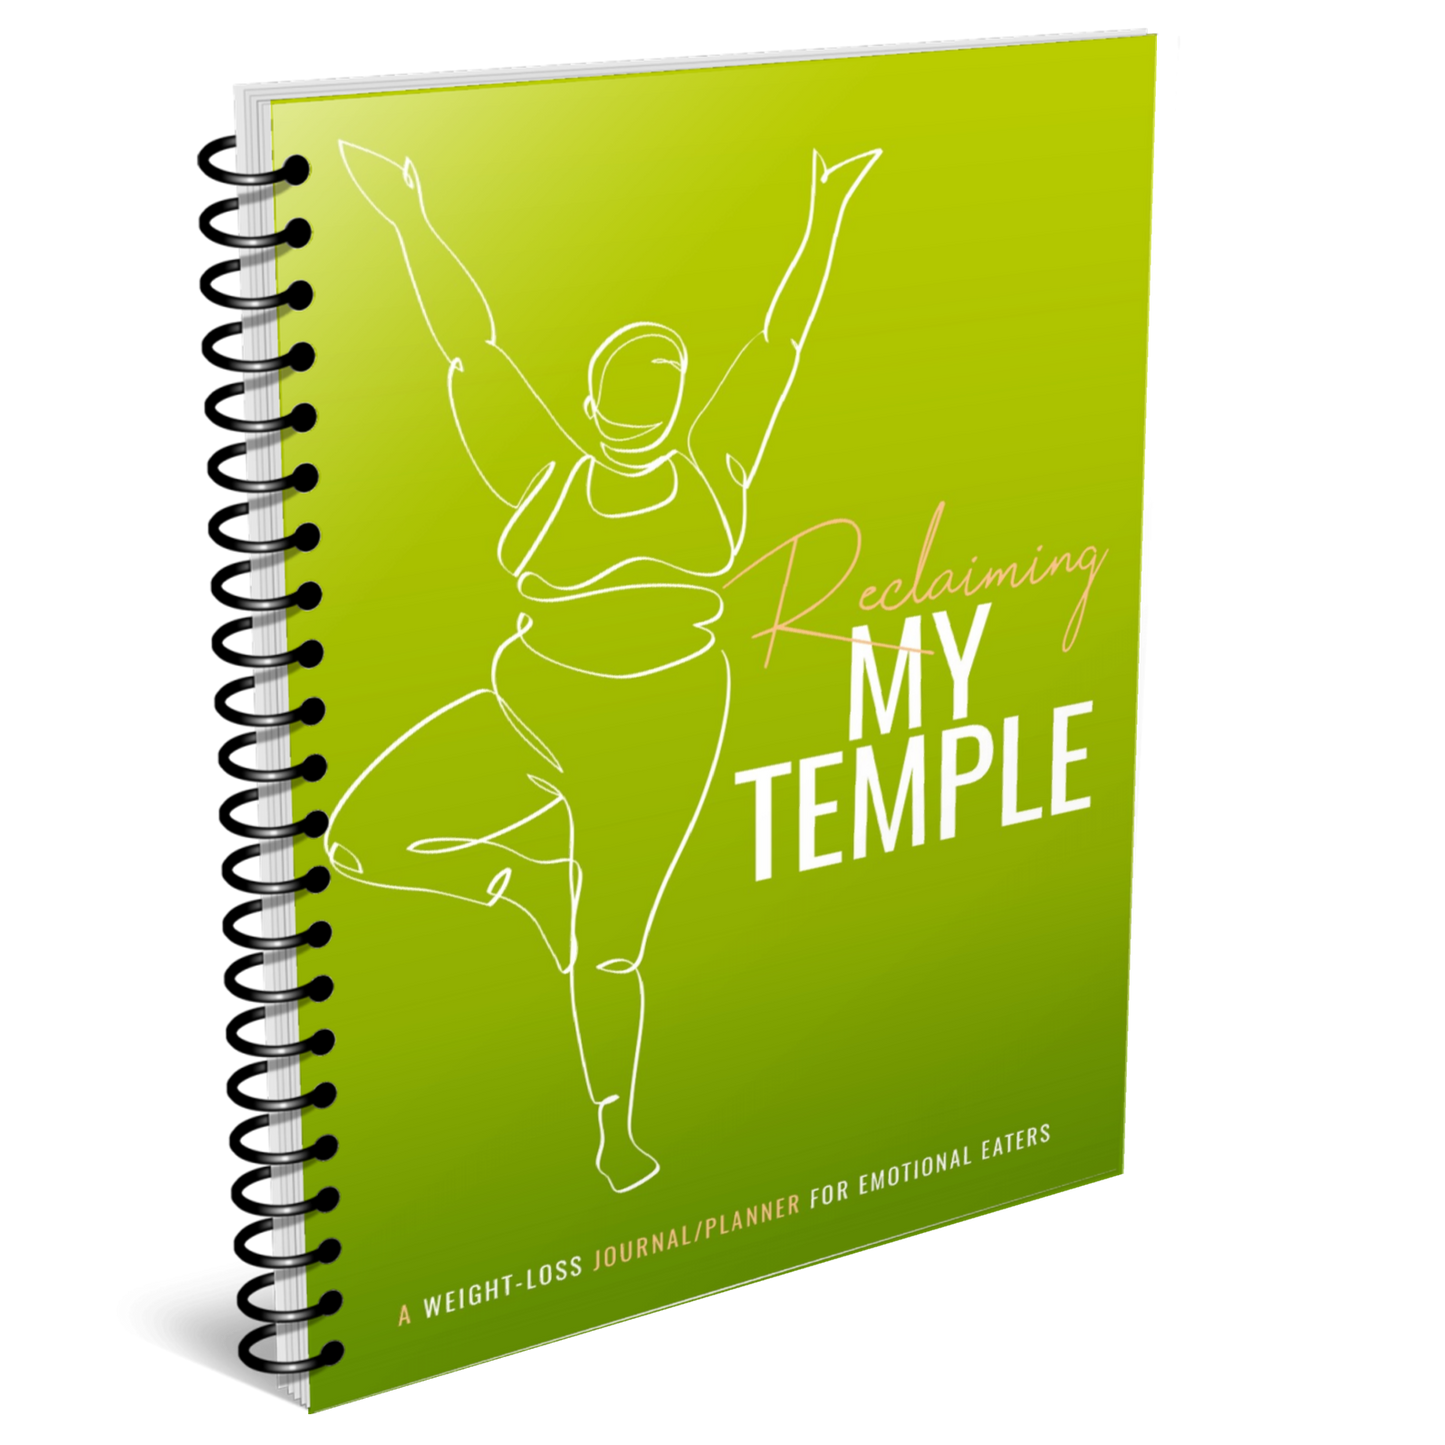 Reclaiming My Temple - A Weight-Loss Journal/Planner for Emotional Eaters